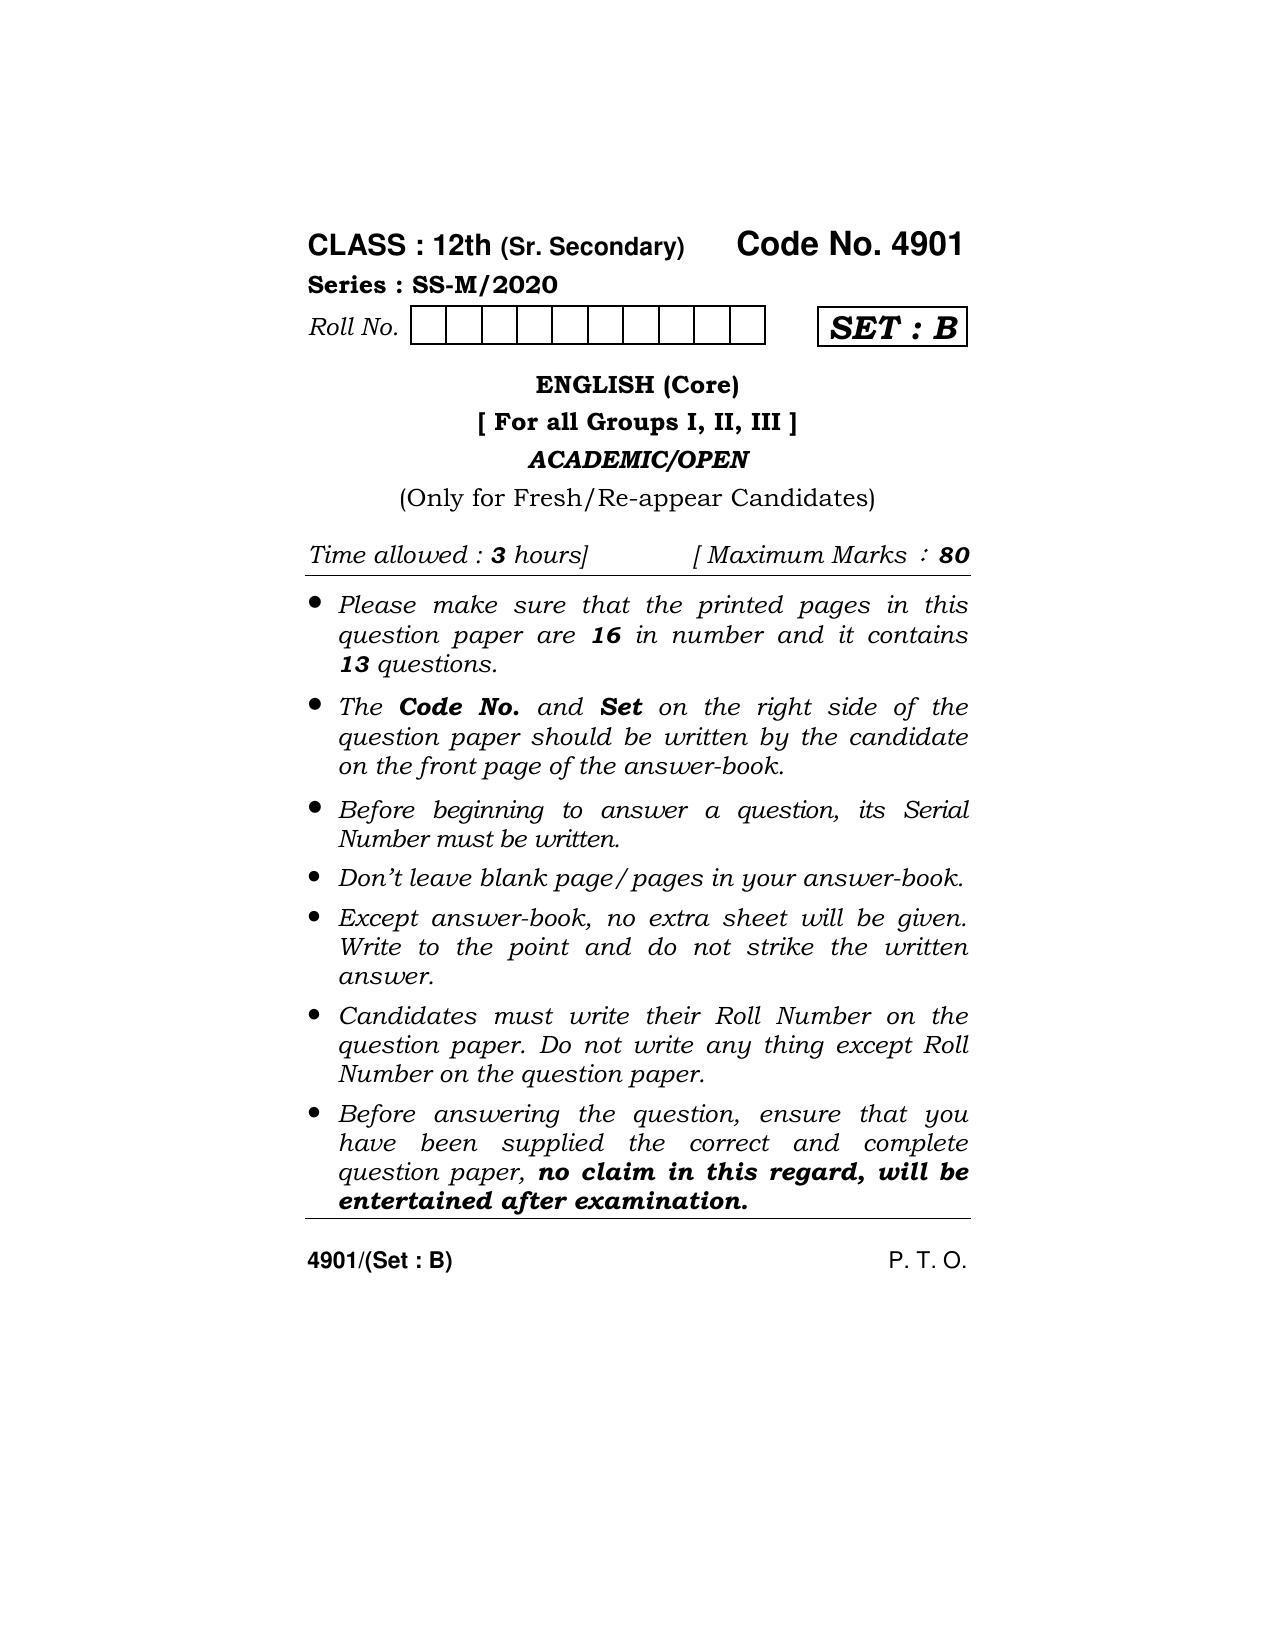 Haryana Board HBSE Class 12 English Core 2020 Question Paper - Page 17